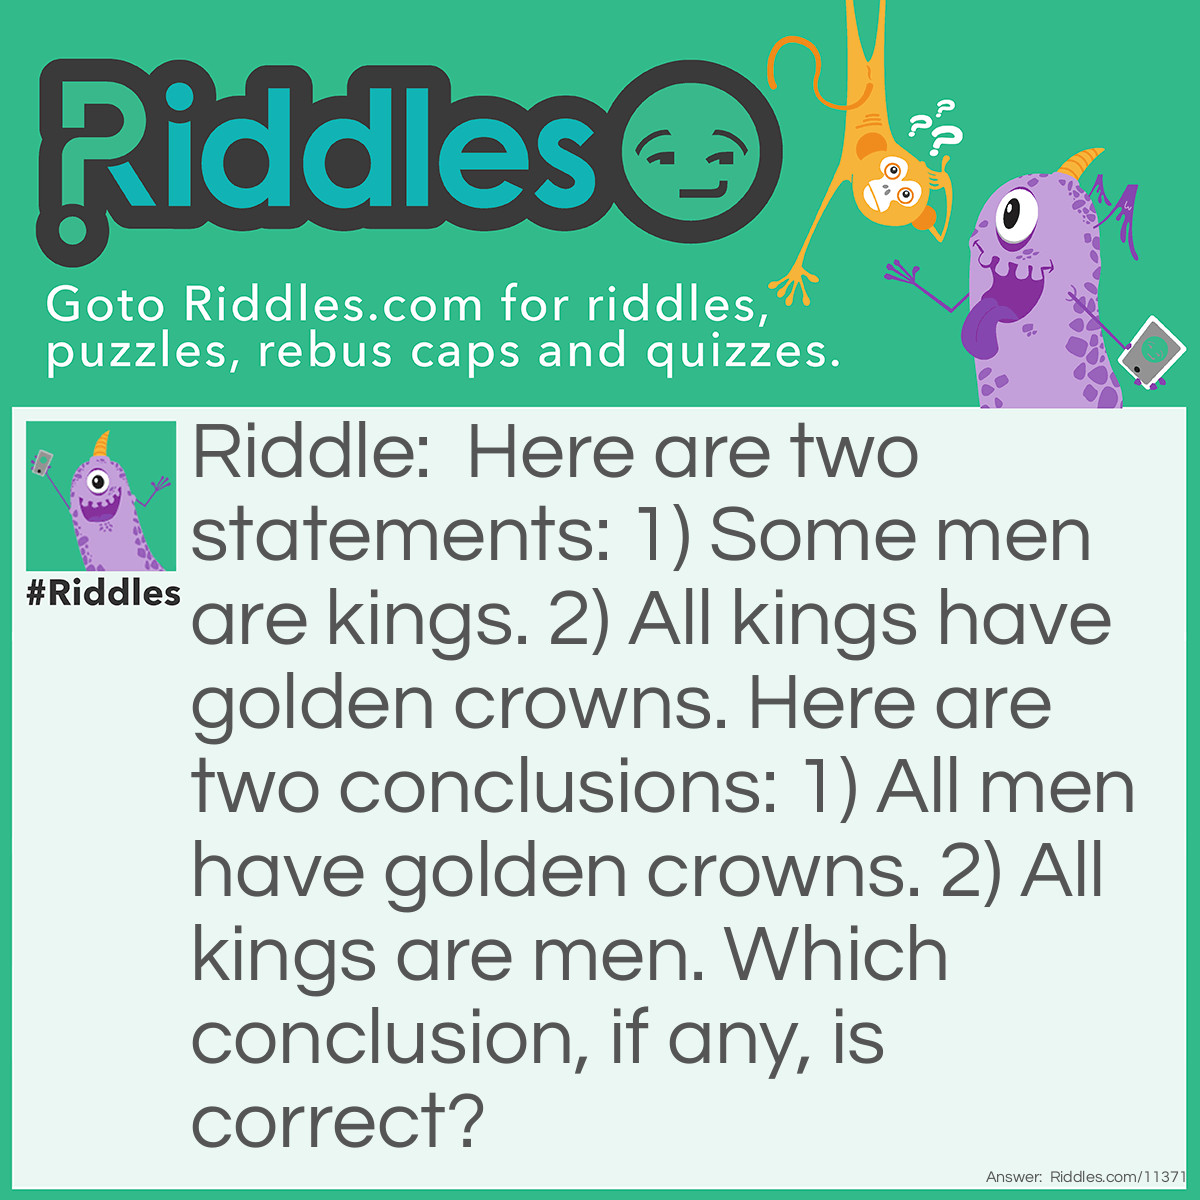 Riddle: Here are two statements: 1) Some men are kings. 2) All kings have golden crowns. Here are two conclusions: 1) All men have golden crowns. 2) All kings are men. Which conclusion, if any, is correct? Answer: Neither conclusion is correct. Conclusion 1 is incorrect; not all men have golden crowns because only SOME men are kings. Conclusion 2 is also incorrect; not all kings are men because all kings have golden crowns, but men do not (men are usually of a lower status than kings). Therefore, both conclusions are incorrect.